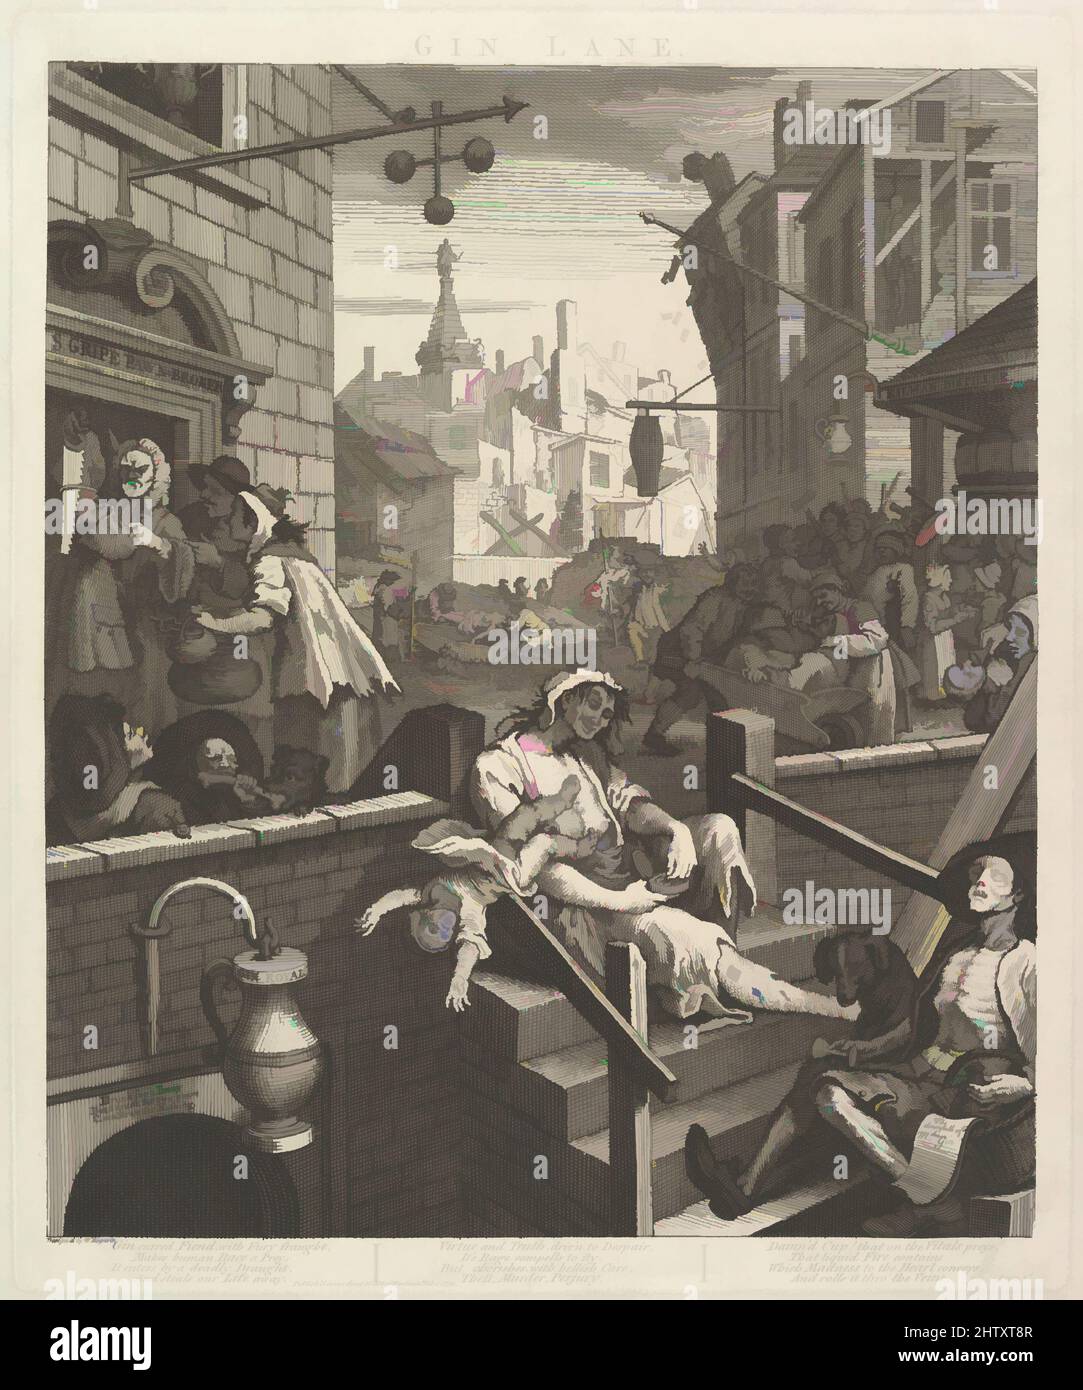 Art inspired by Gin Lane, February 1, 1751, Etching and engraving; third state of three, plate: 15 5/16 x 12 11/16 in. (38.9 x 32.2 cm), Prints, William Hogarth (British, London 1697–1764 London, Classic works modernized by Artotop with a splash of modernity. Shapes, color and value, eye-catching visual impact on art. Emotions through freedom of artworks in a contemporary way. A timeless message pursuing a wildly creative new direction. Artists turning to the digital medium and creating the Artotop NFT Stock Photo